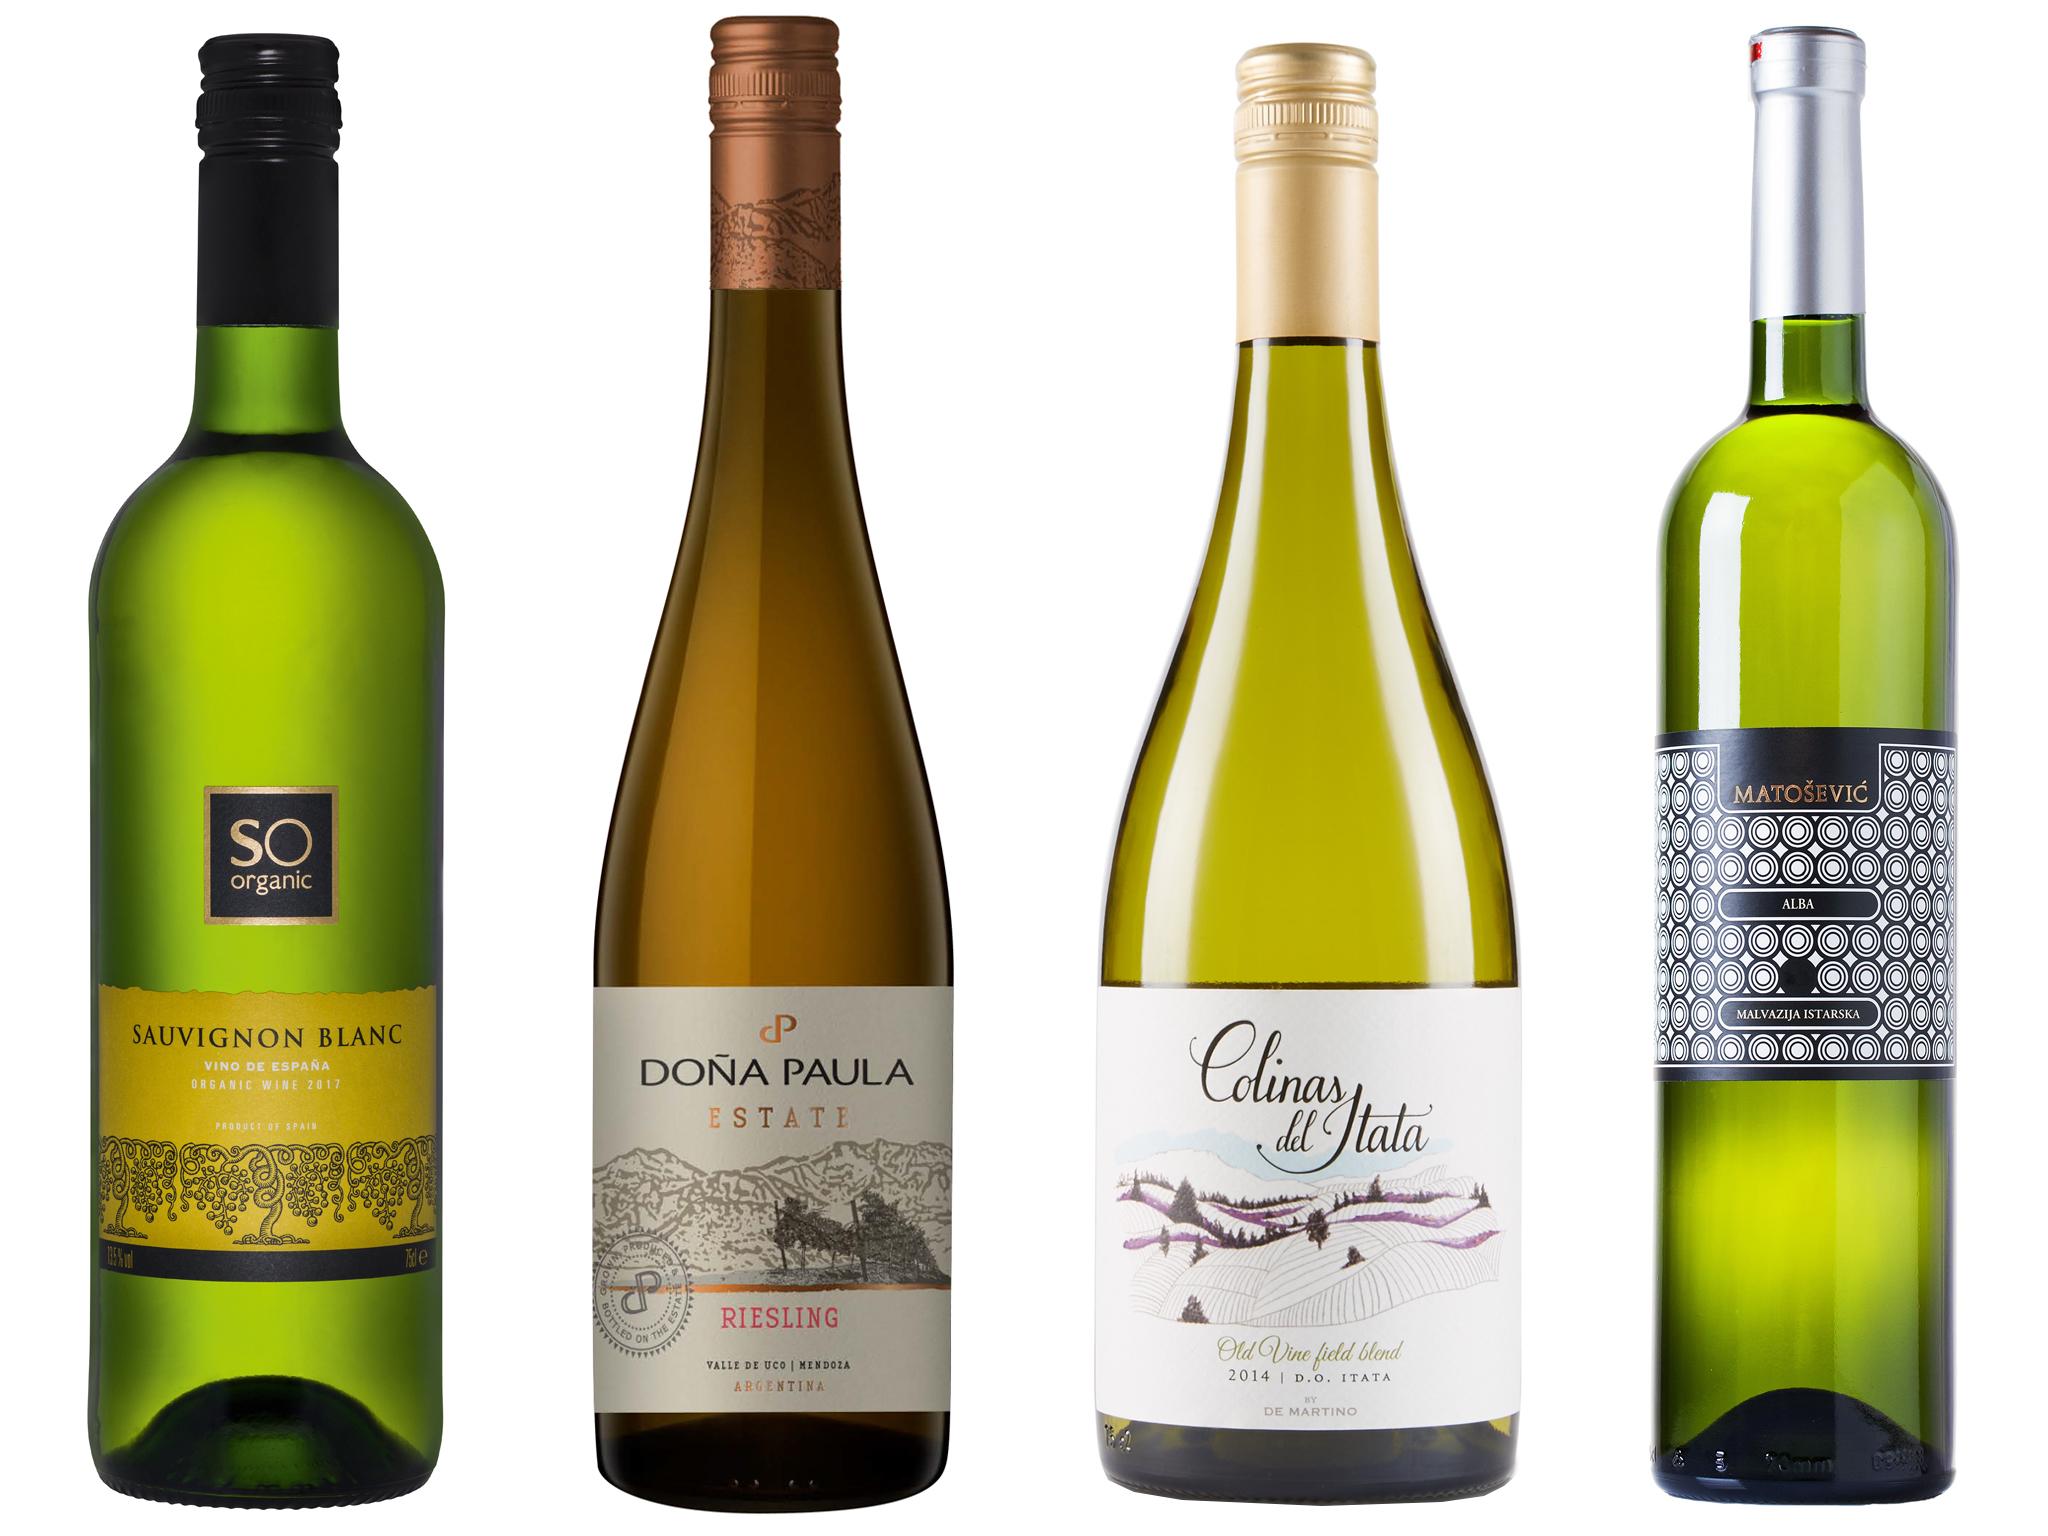 From classic sauvignon blanc to unusual Croatian varieties, these are the grapes to enjoy now and in the coming months